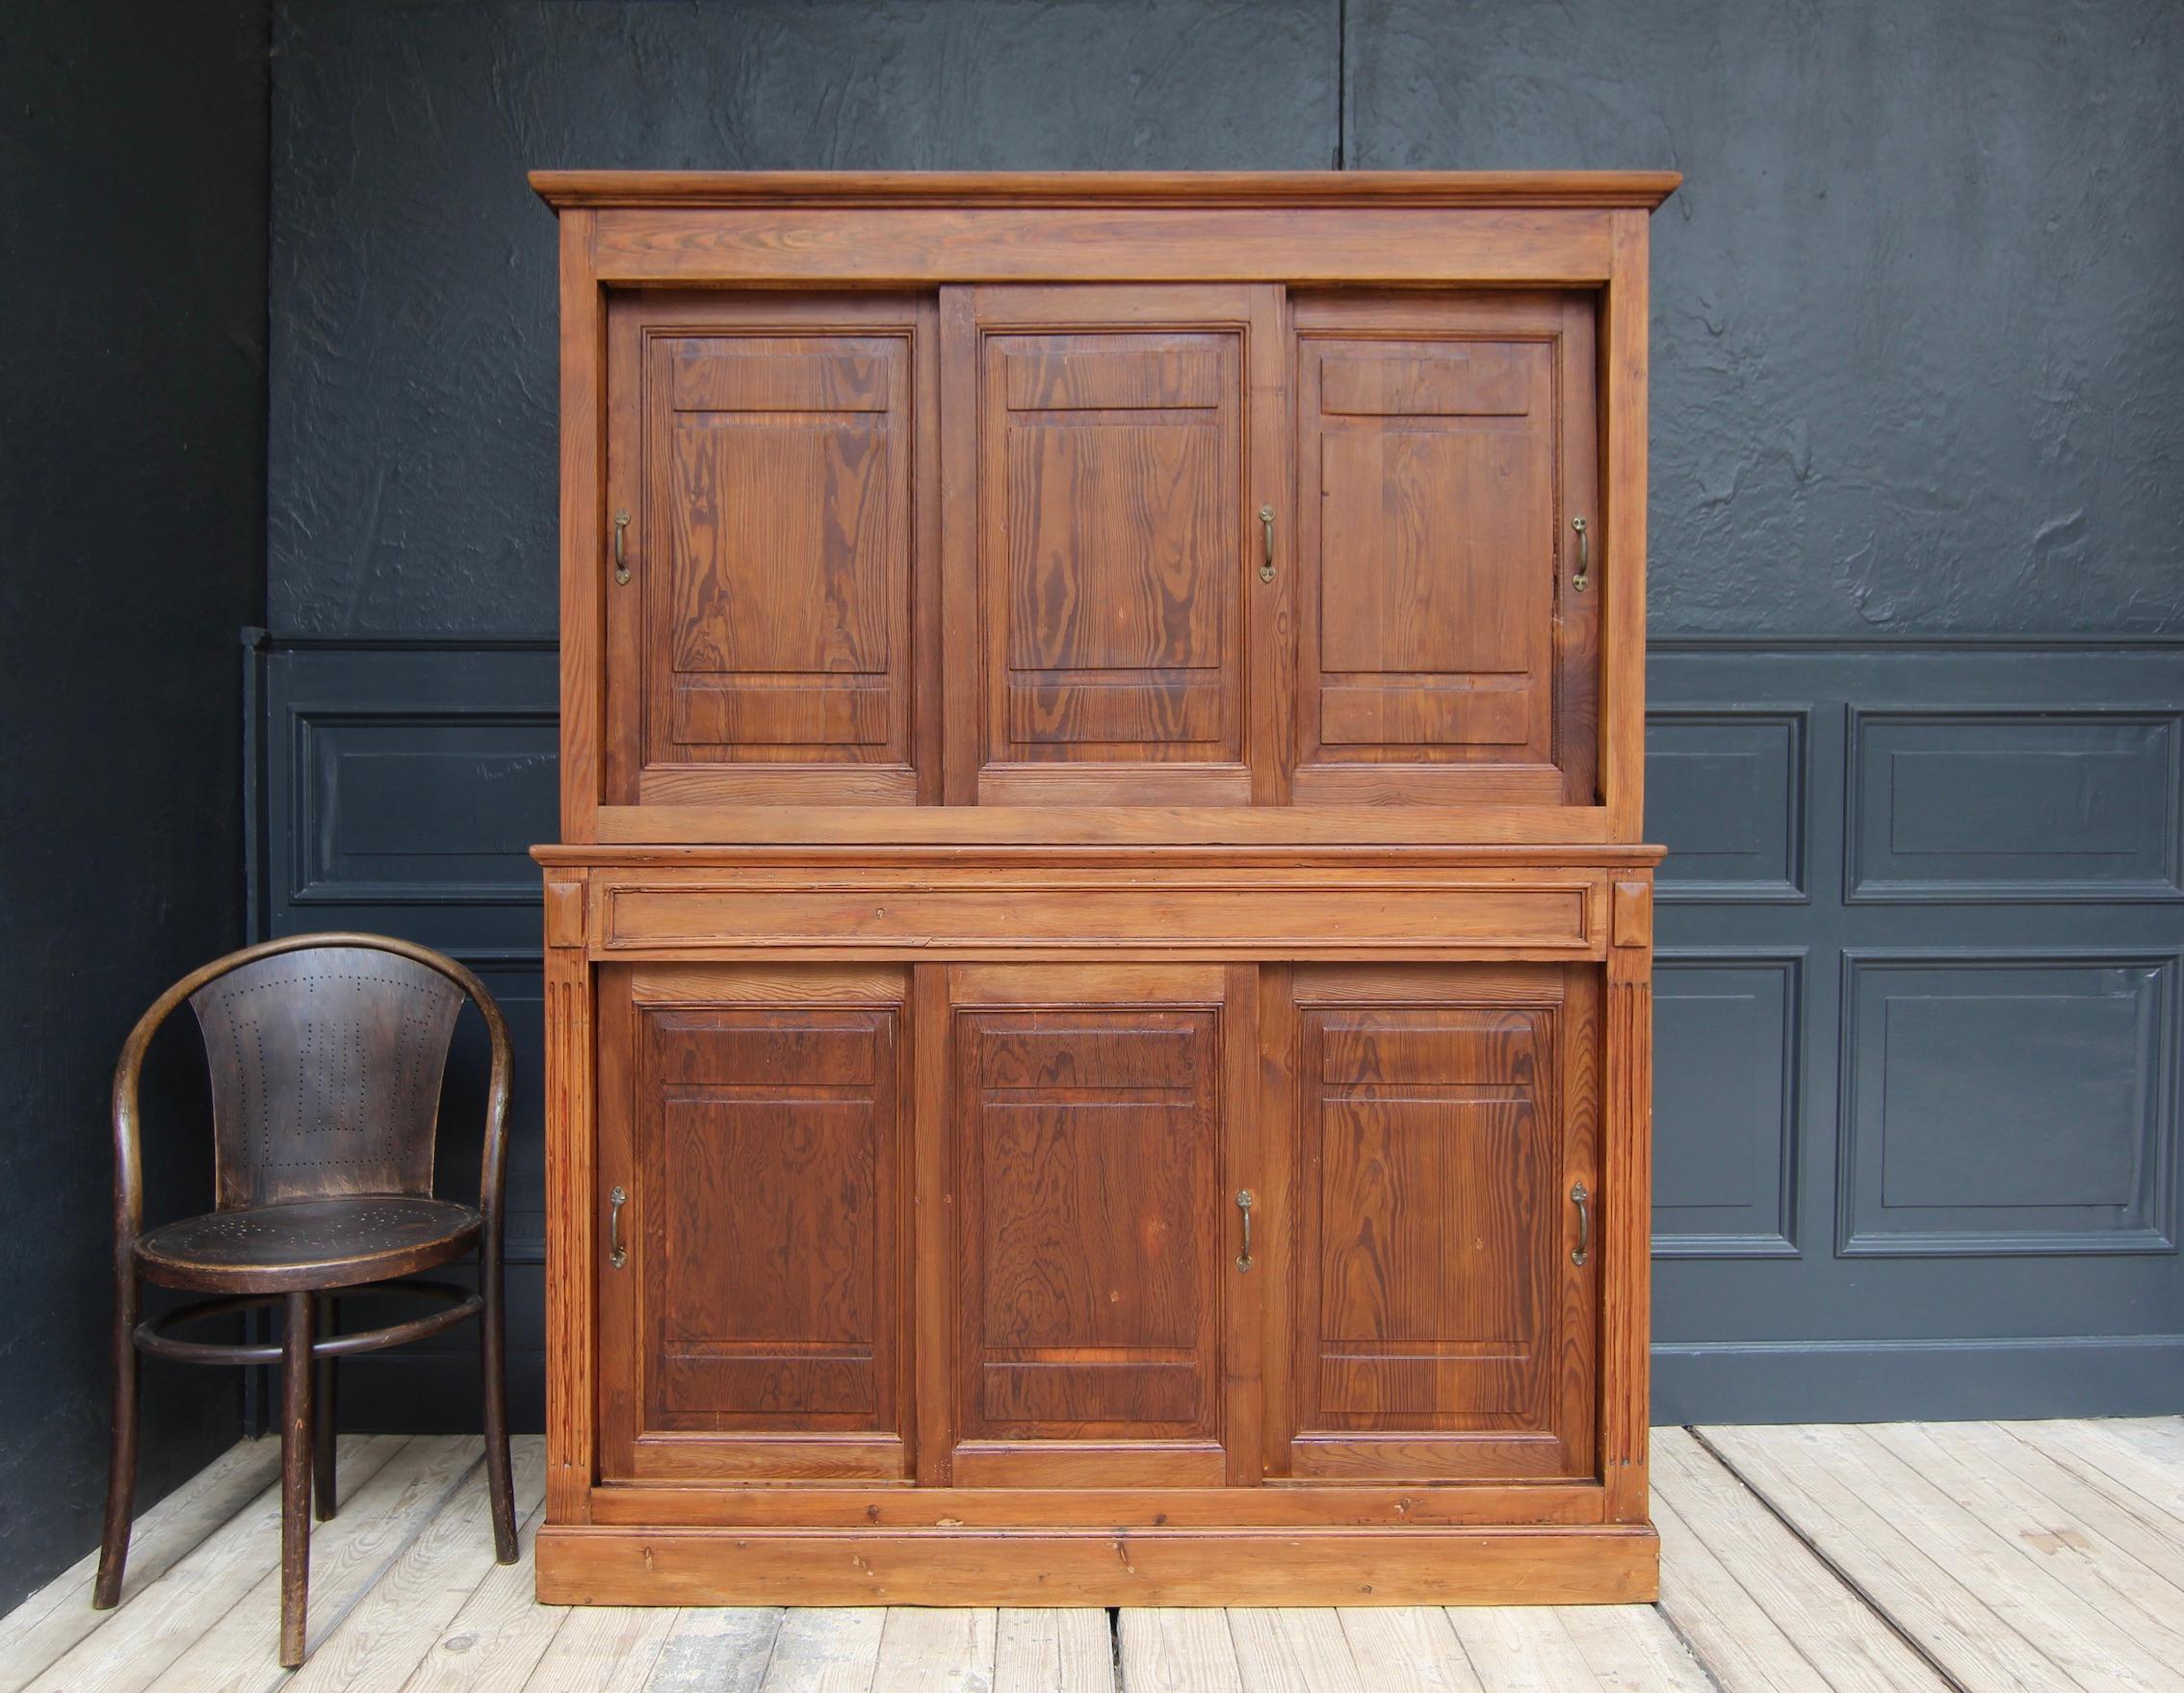 Vintage sliding door cabinet from the early 20th century. Made in Pitch Pine wood. 

Consisting of a lower and an upper cabinet, each with 3 sliding doors made in frame construction.

Original brass handles mounted.

Fitted with 3 shelves inside (1